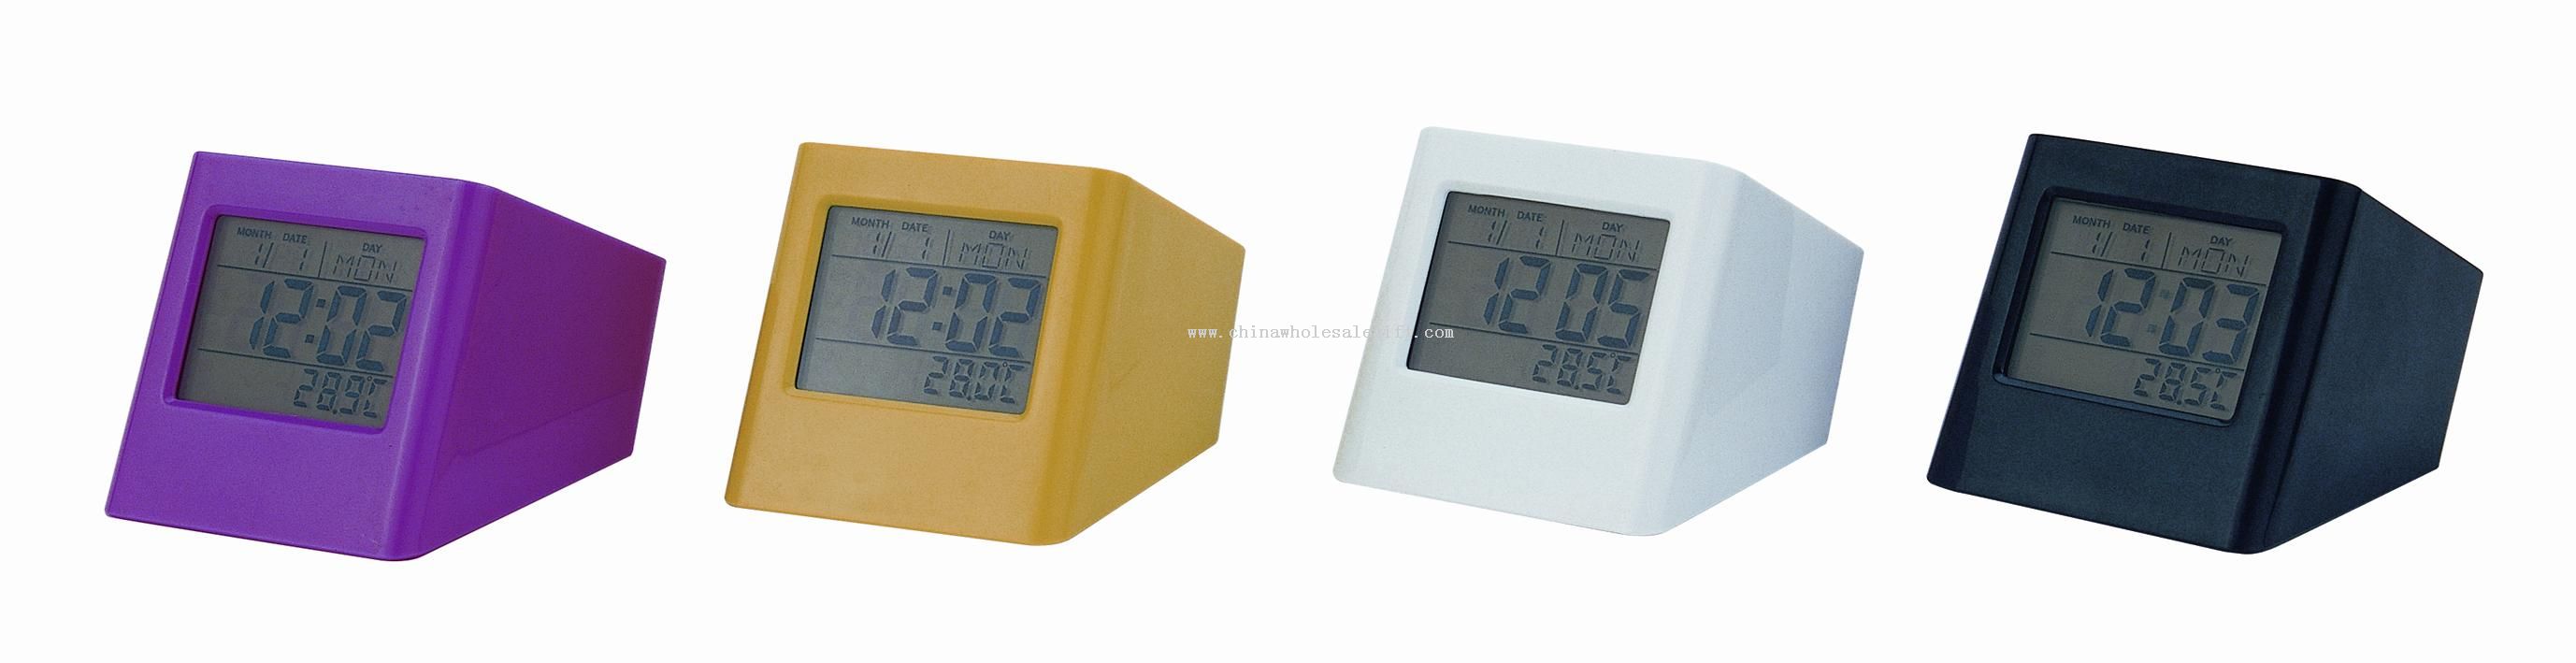 Thermometer World Time Kalender